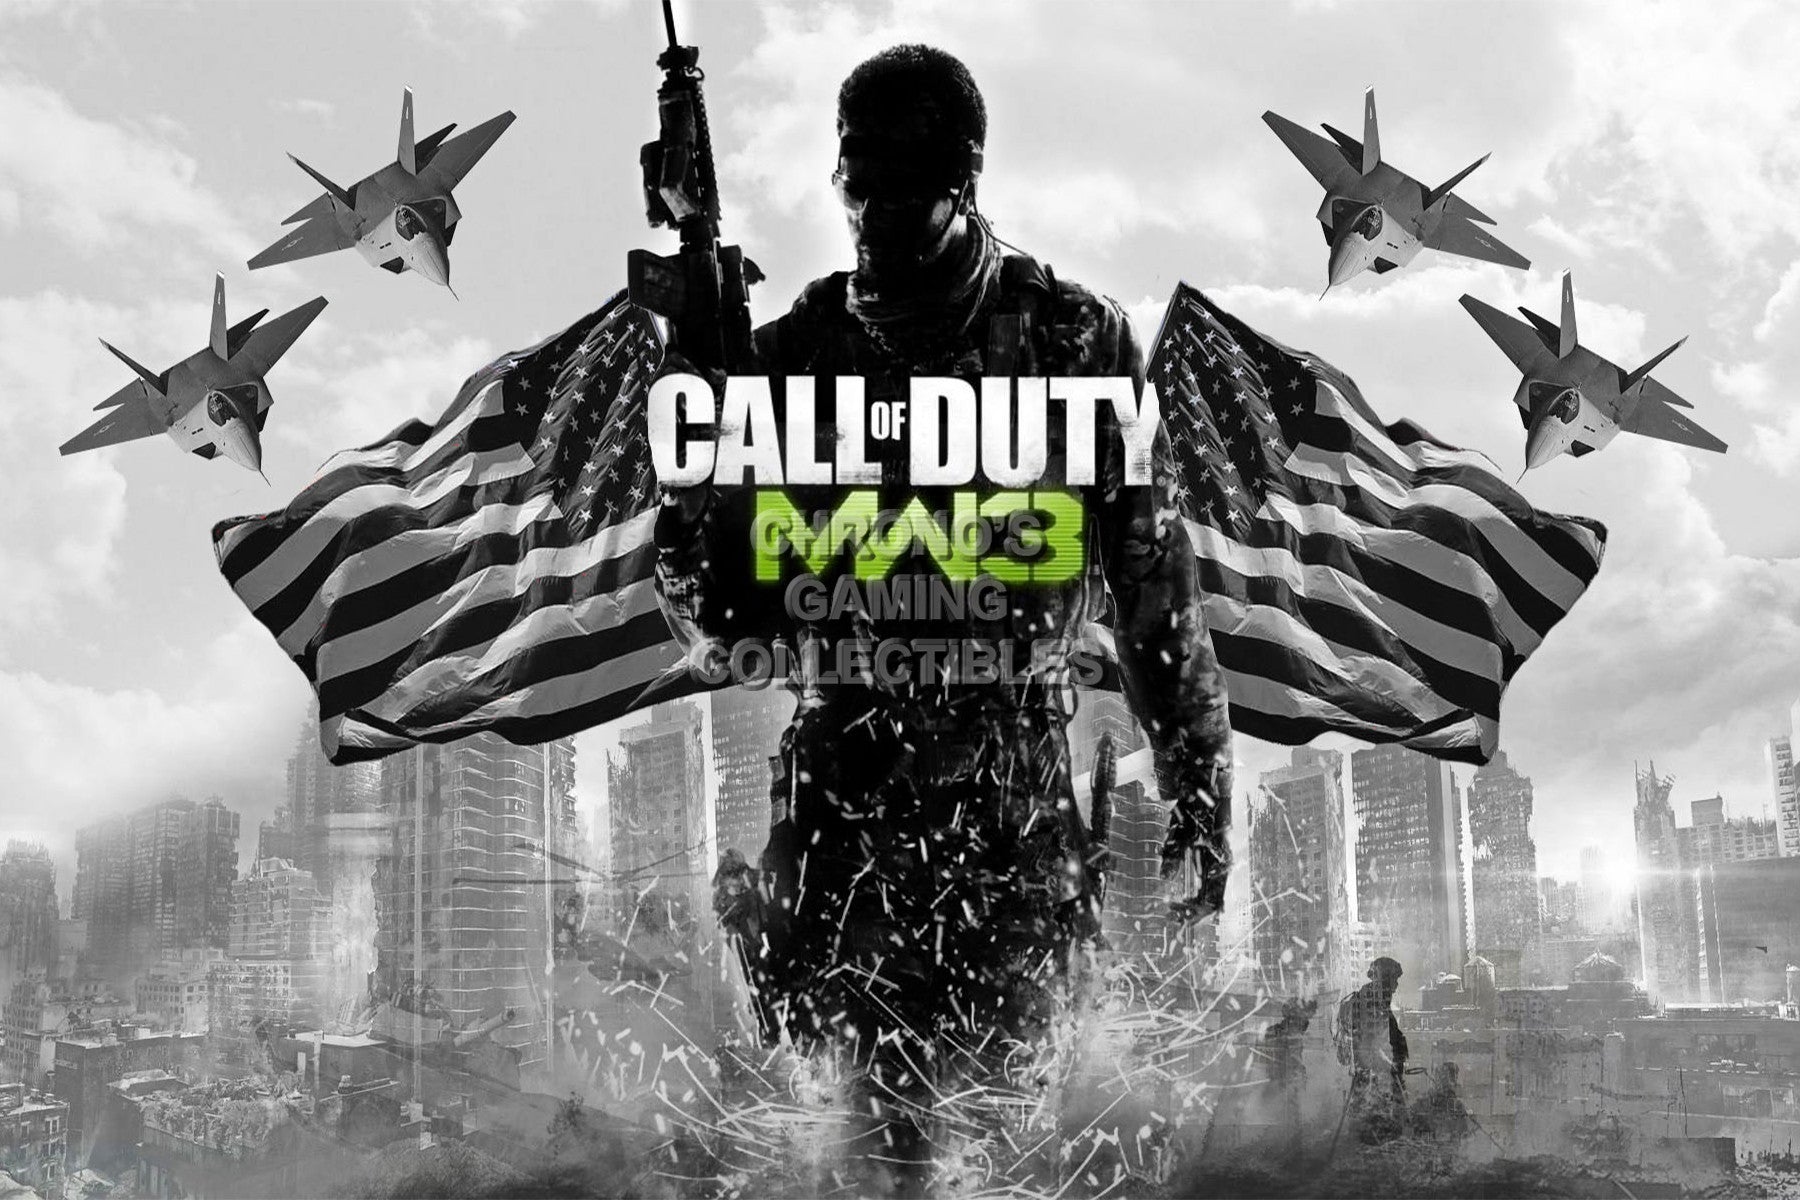 ps3 call of duty mw3